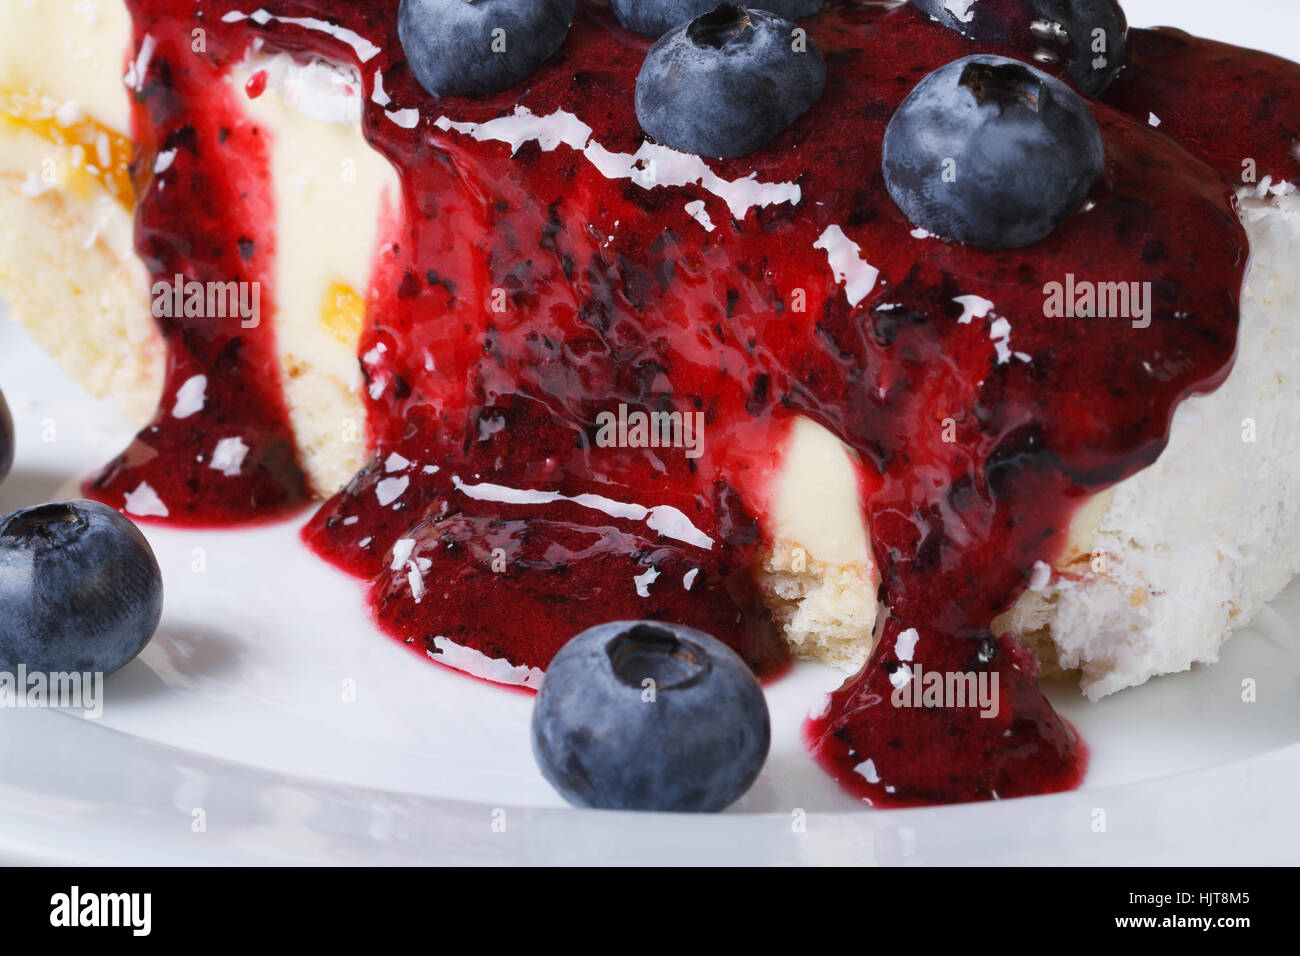 Blueberry cheesecake with berry sauce on a plate macro horizontal Stock Photo